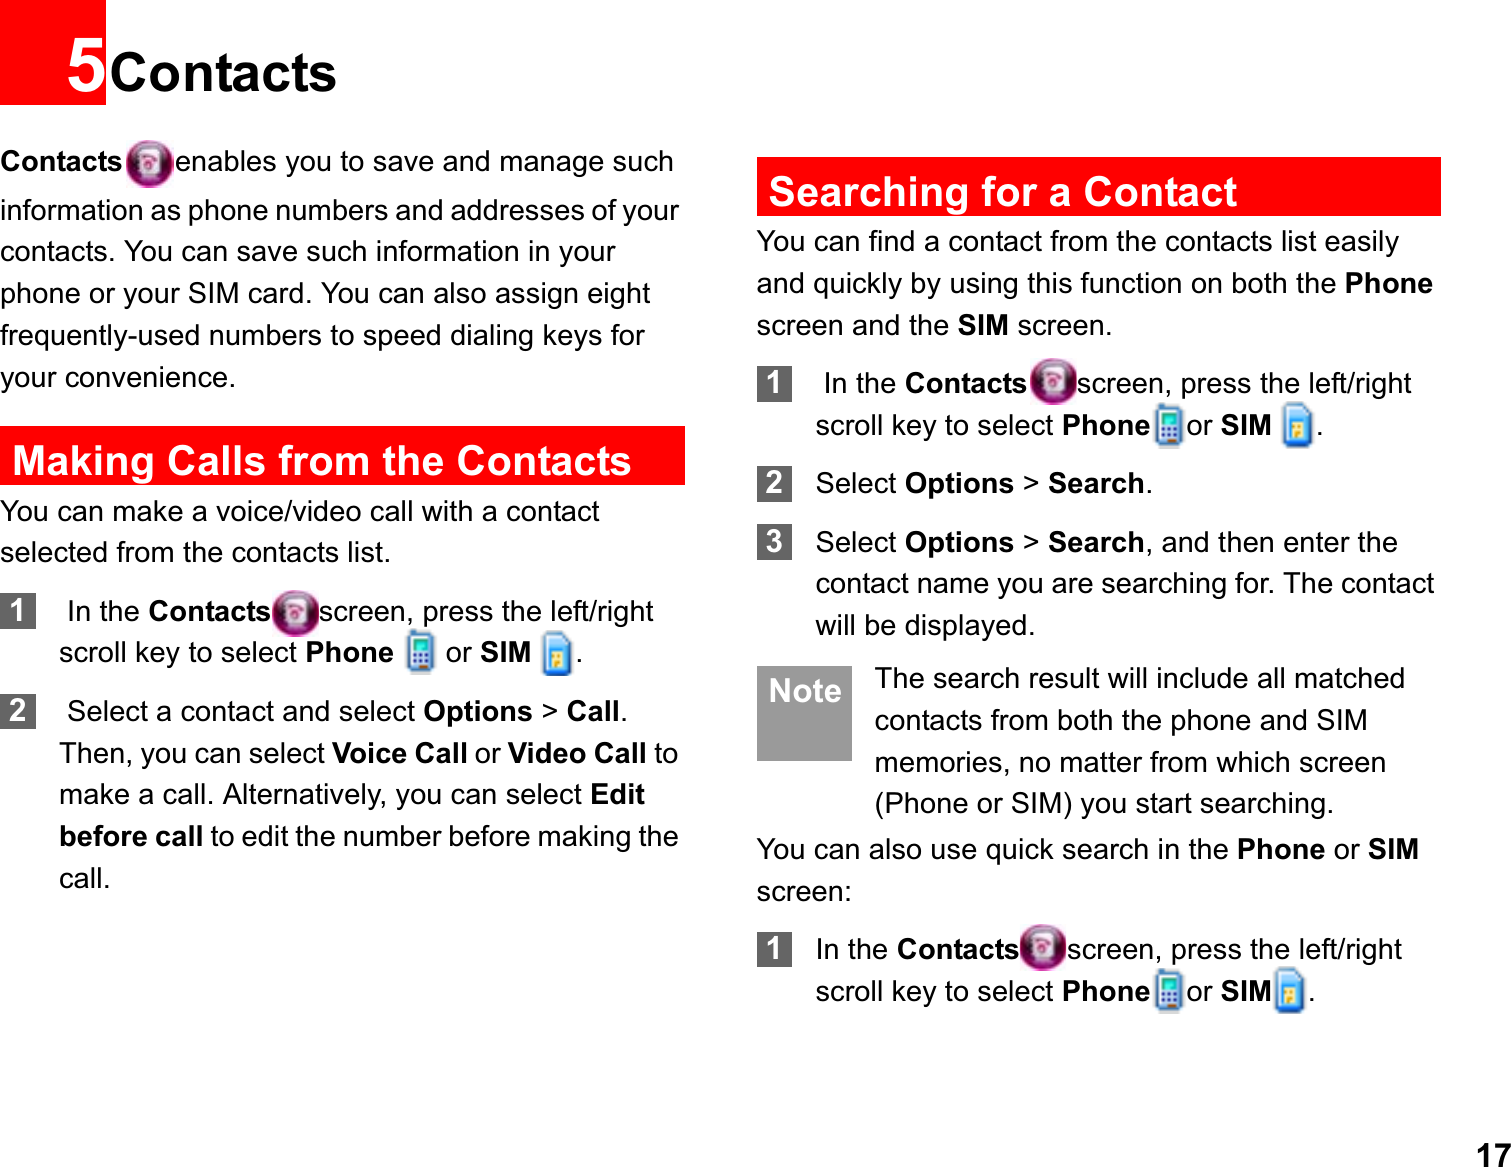 175ContactsContacts enables you to save and manage such information as phone numbers and addresses of your contacts. You can save such information in your phone or your SIM card. You can also assign eight frequently-used numbers to speed dialing keys for your convenience.Making Calls from the ContactsYou can make a voice/video call with a contact selected from the contacts list.1 In the Contacts screen, press the left/right scroll key to select Phone  or SIM  .2 Select a contact and select Options &gt; Call.Then, you can select Voice Call or Video Call to make a call. Alternatively, you can select Editbefore call to edit the number before making the call.Searching for a ContactYou can find a contact from the contacts list easily and quickly by using this function on both the Phonescreen and the SIM screen.1 In the Contacts screen, press the left/right scroll key to select Phone or SIM  .2Select Options &gt; Search.3Select Options &gt; Search, and then enter the contact name you are searching for. The contact will be displayed. Note The search result will include all matched contacts from both the phone and SIM memories, no matter from which screen (Phone or SIM) you start searching.You can also use quick search in the Phone or SIMscreen:1In the Contacts screen, press the left/right scroll key to select Phone or SIM .